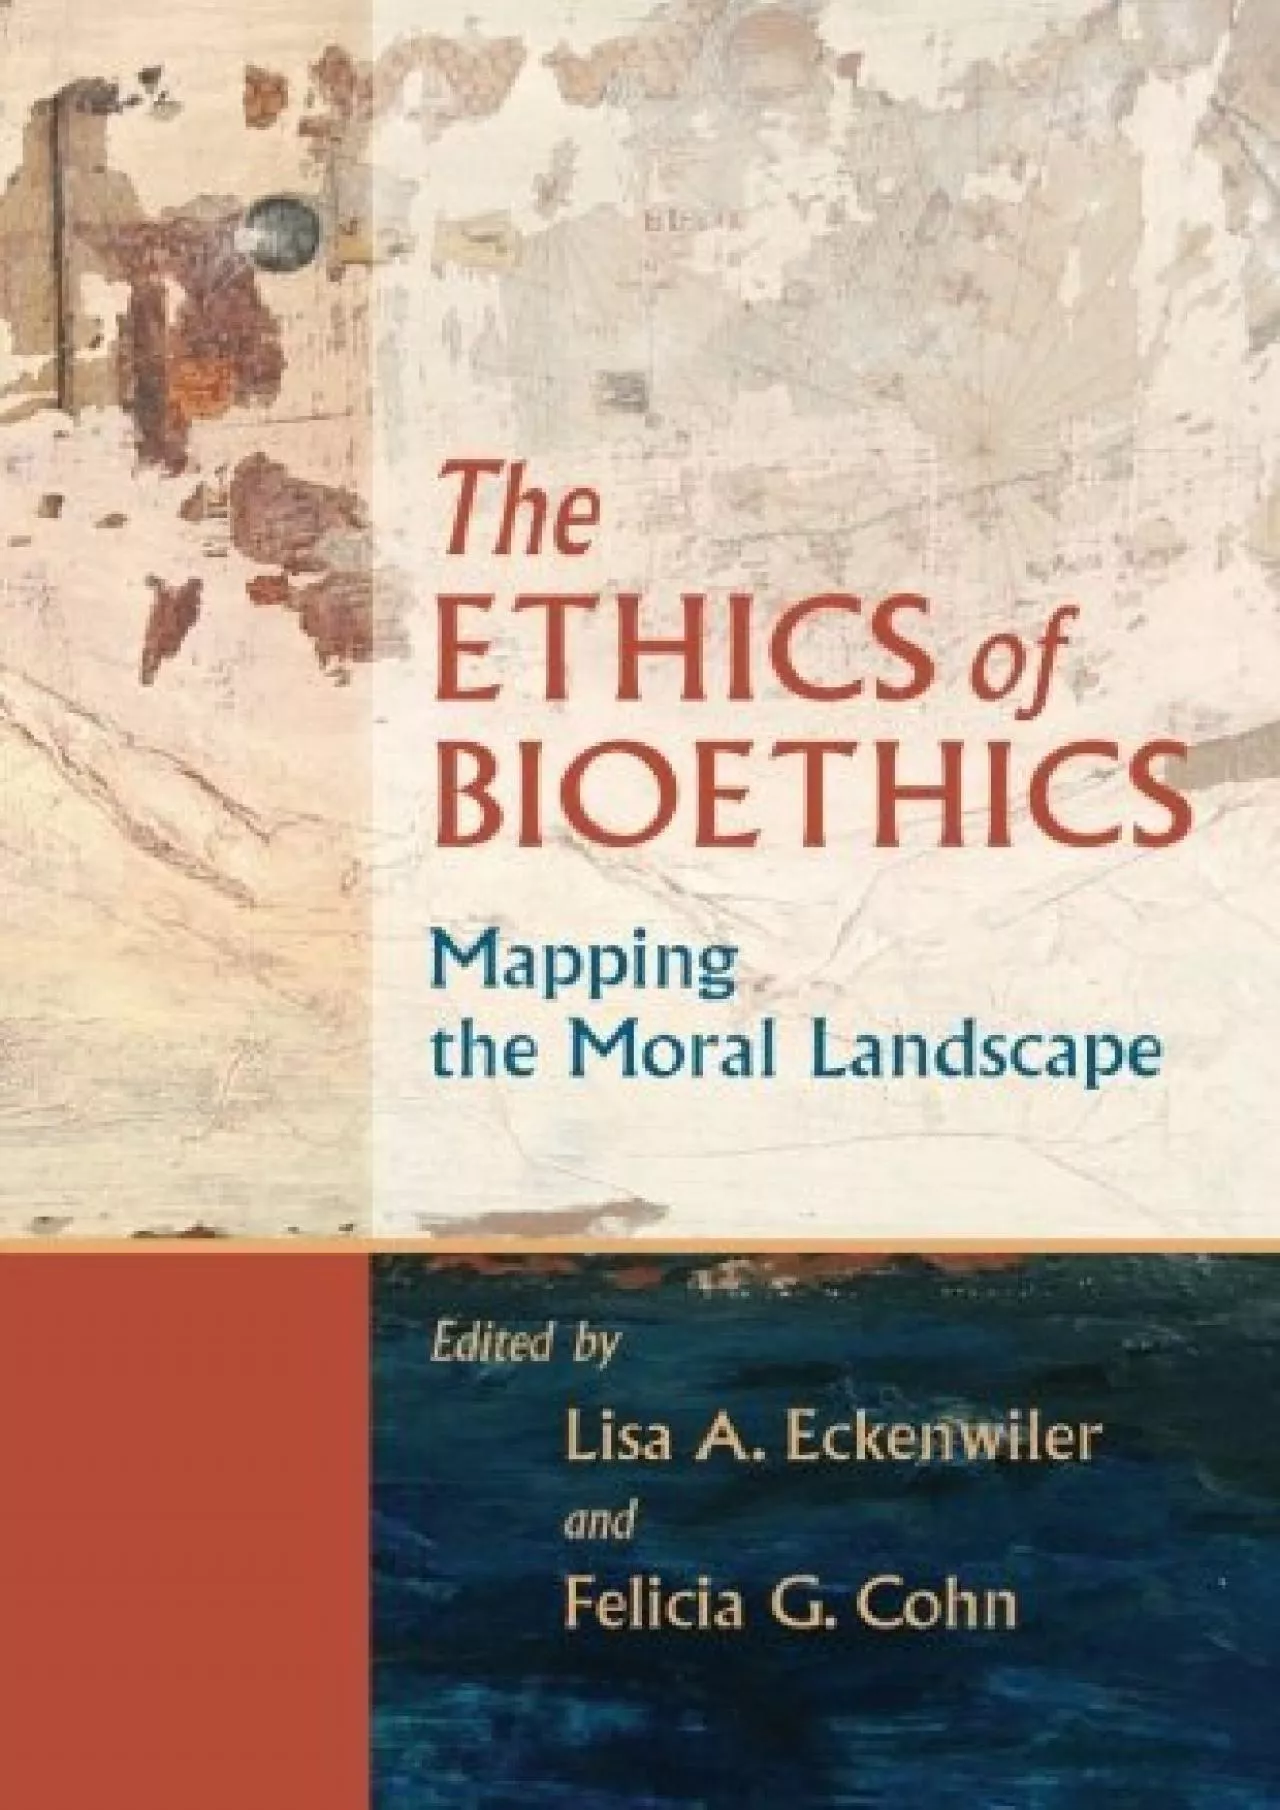 (EBOOK)-The Ethics of Bioethics: Mapping the Moral Landscape